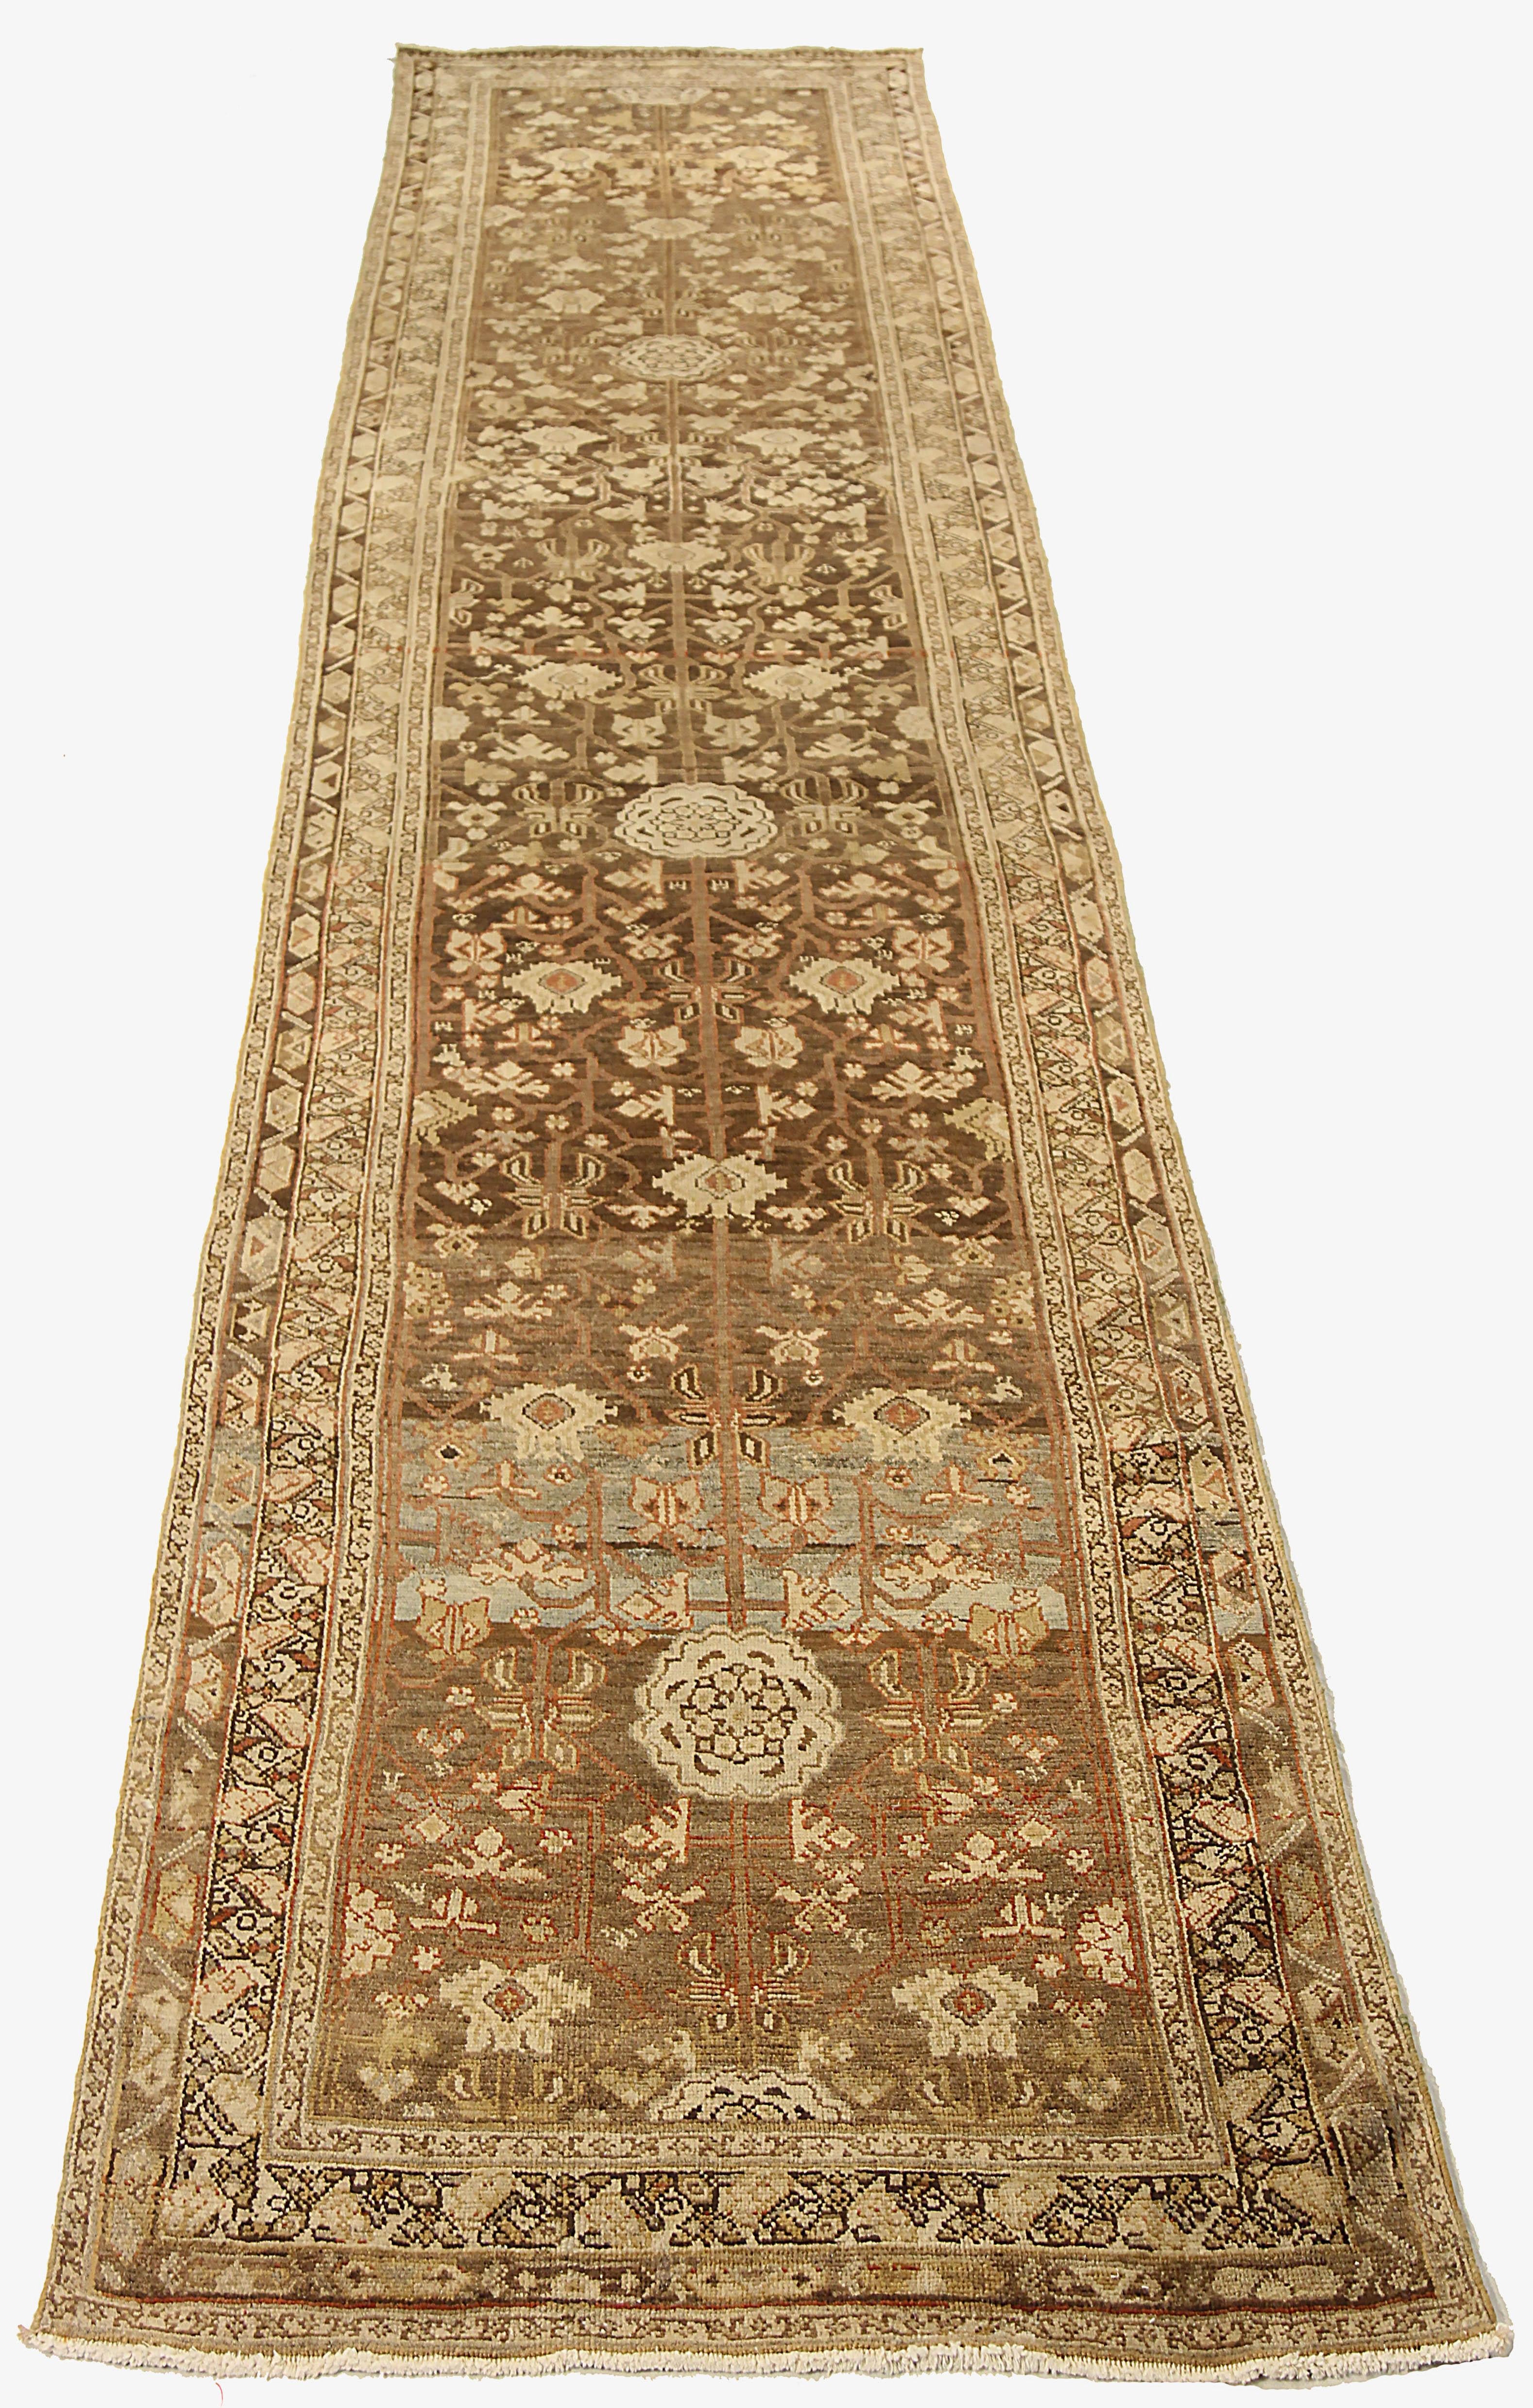 Antique Persian runner rug handwoven from the finest sheep’s wool and colored with all-natural vegetable dyes that are safe for humans and pets. It’s a traditional Heriz design featuring a lovely brown field covered with ivory floral and tribal